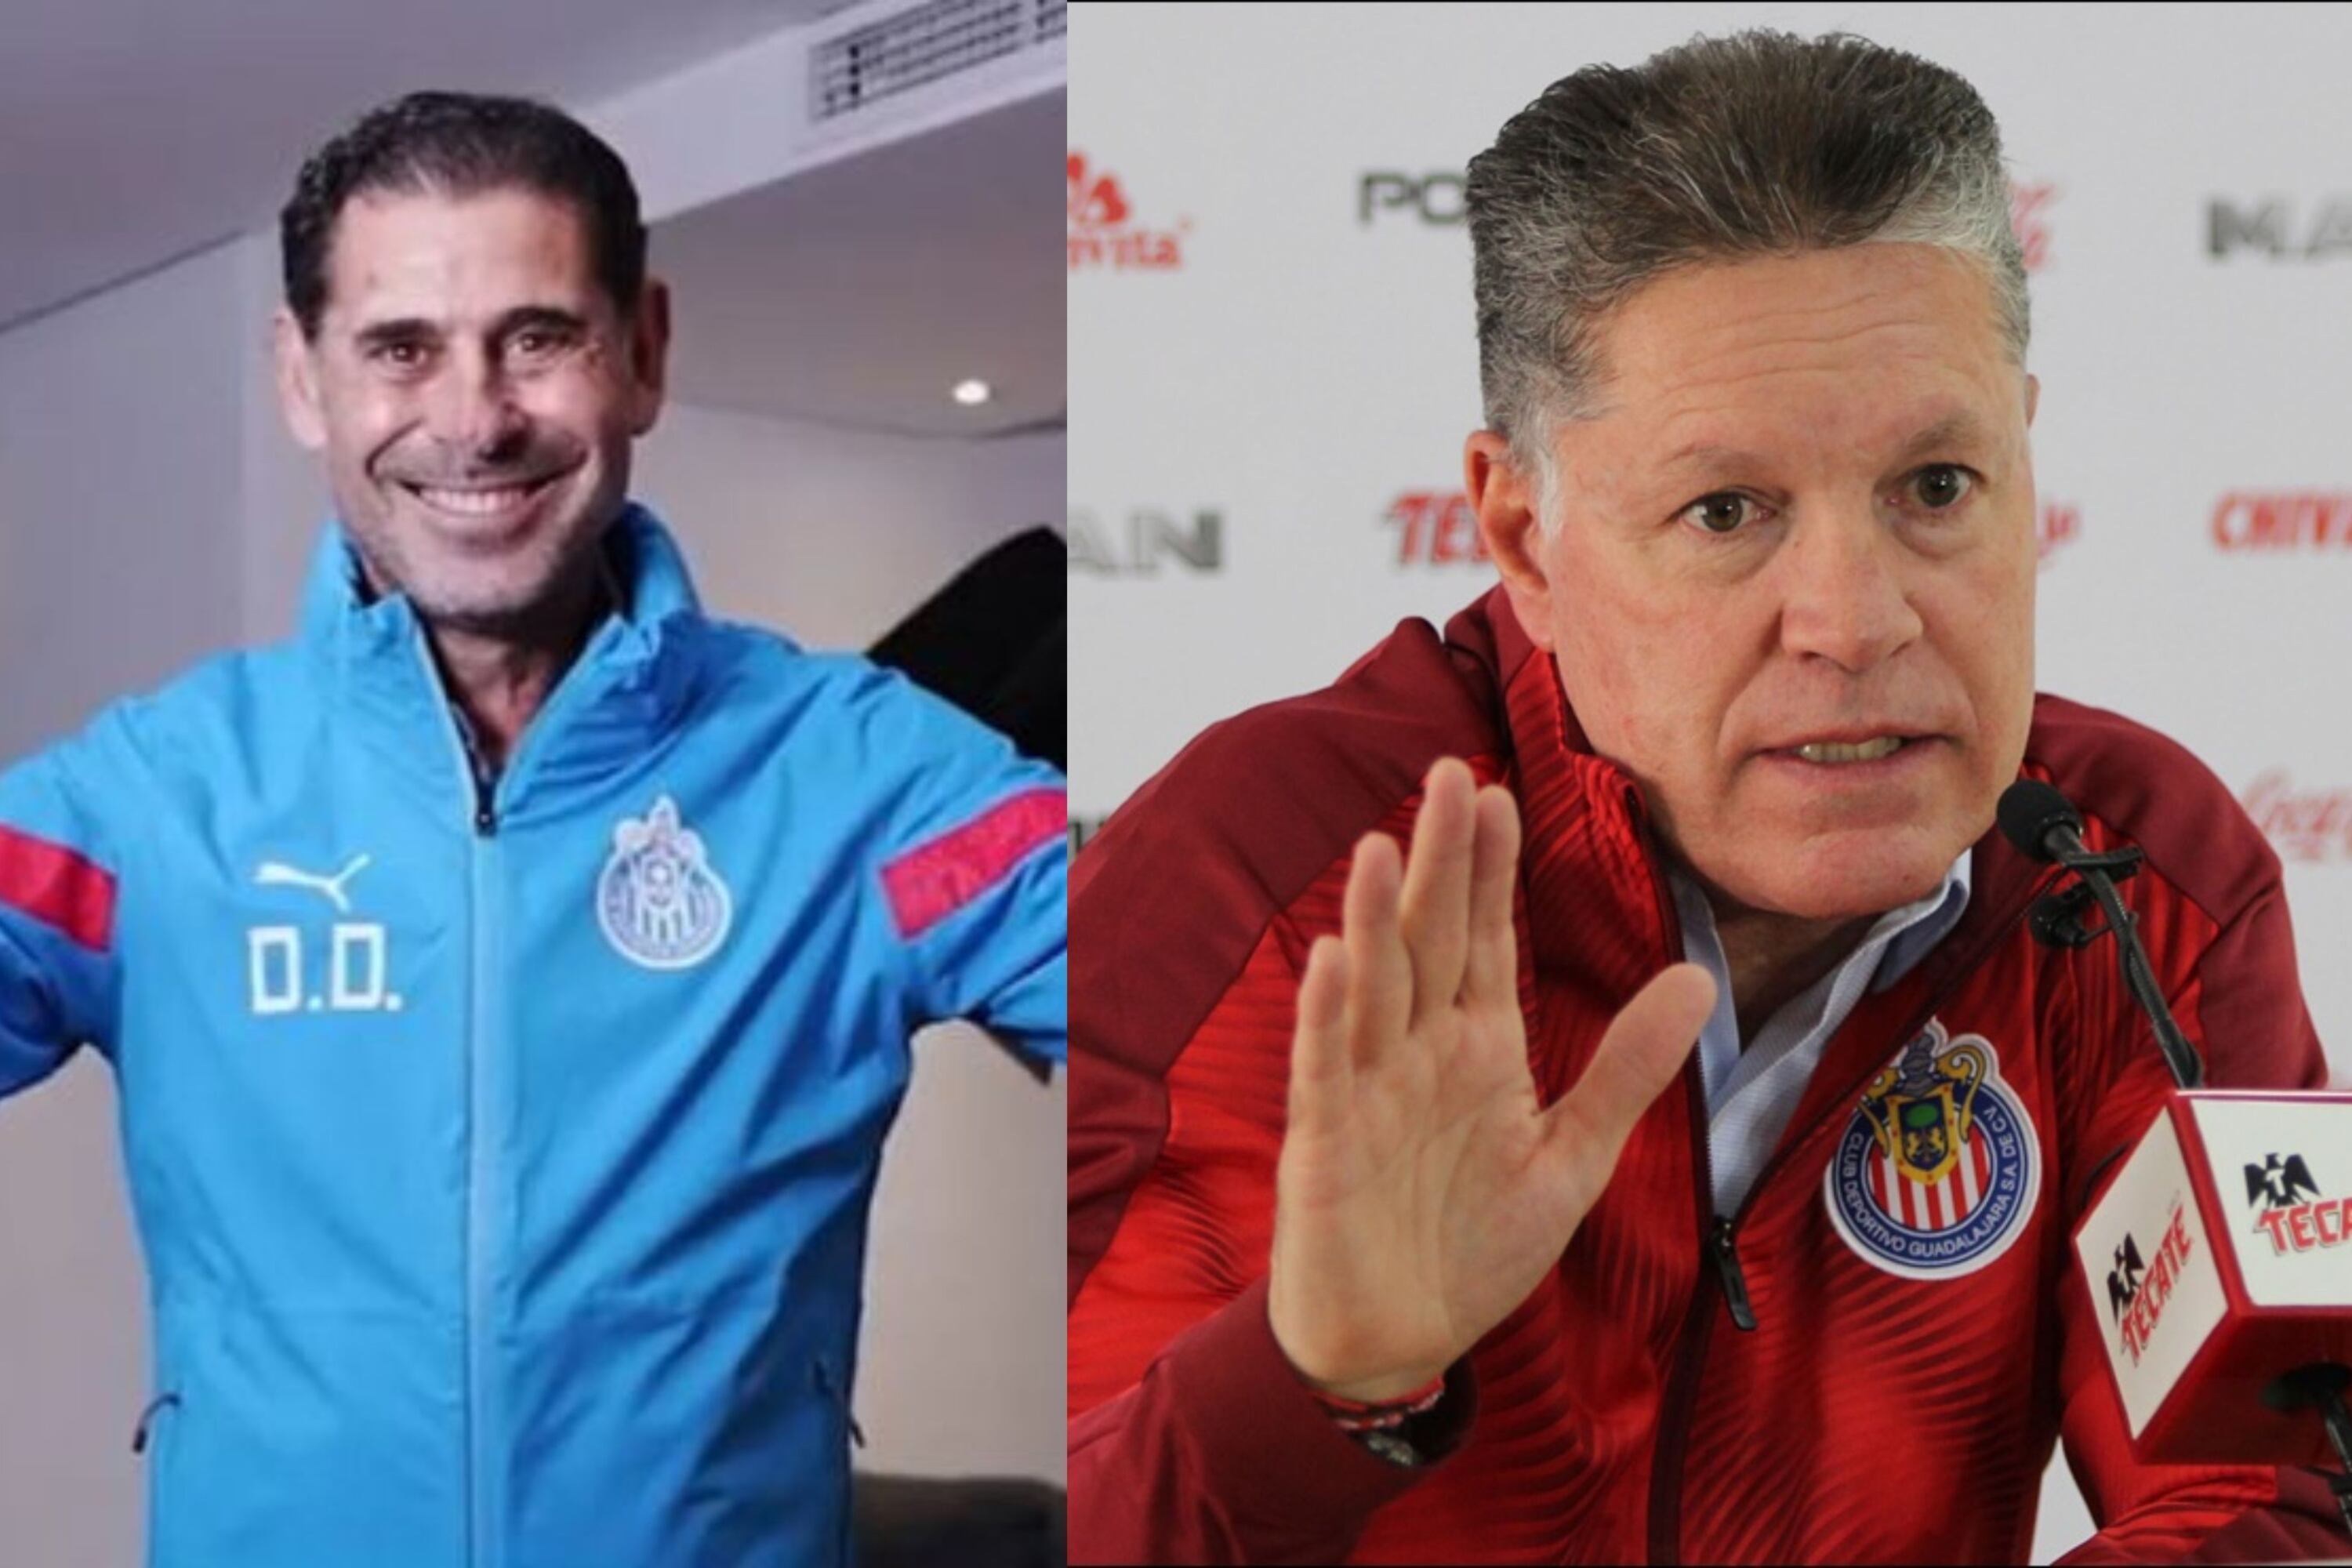 He swore loyalty to Pelaez, now he will leave Chivas after Fernando Hierro's arrival